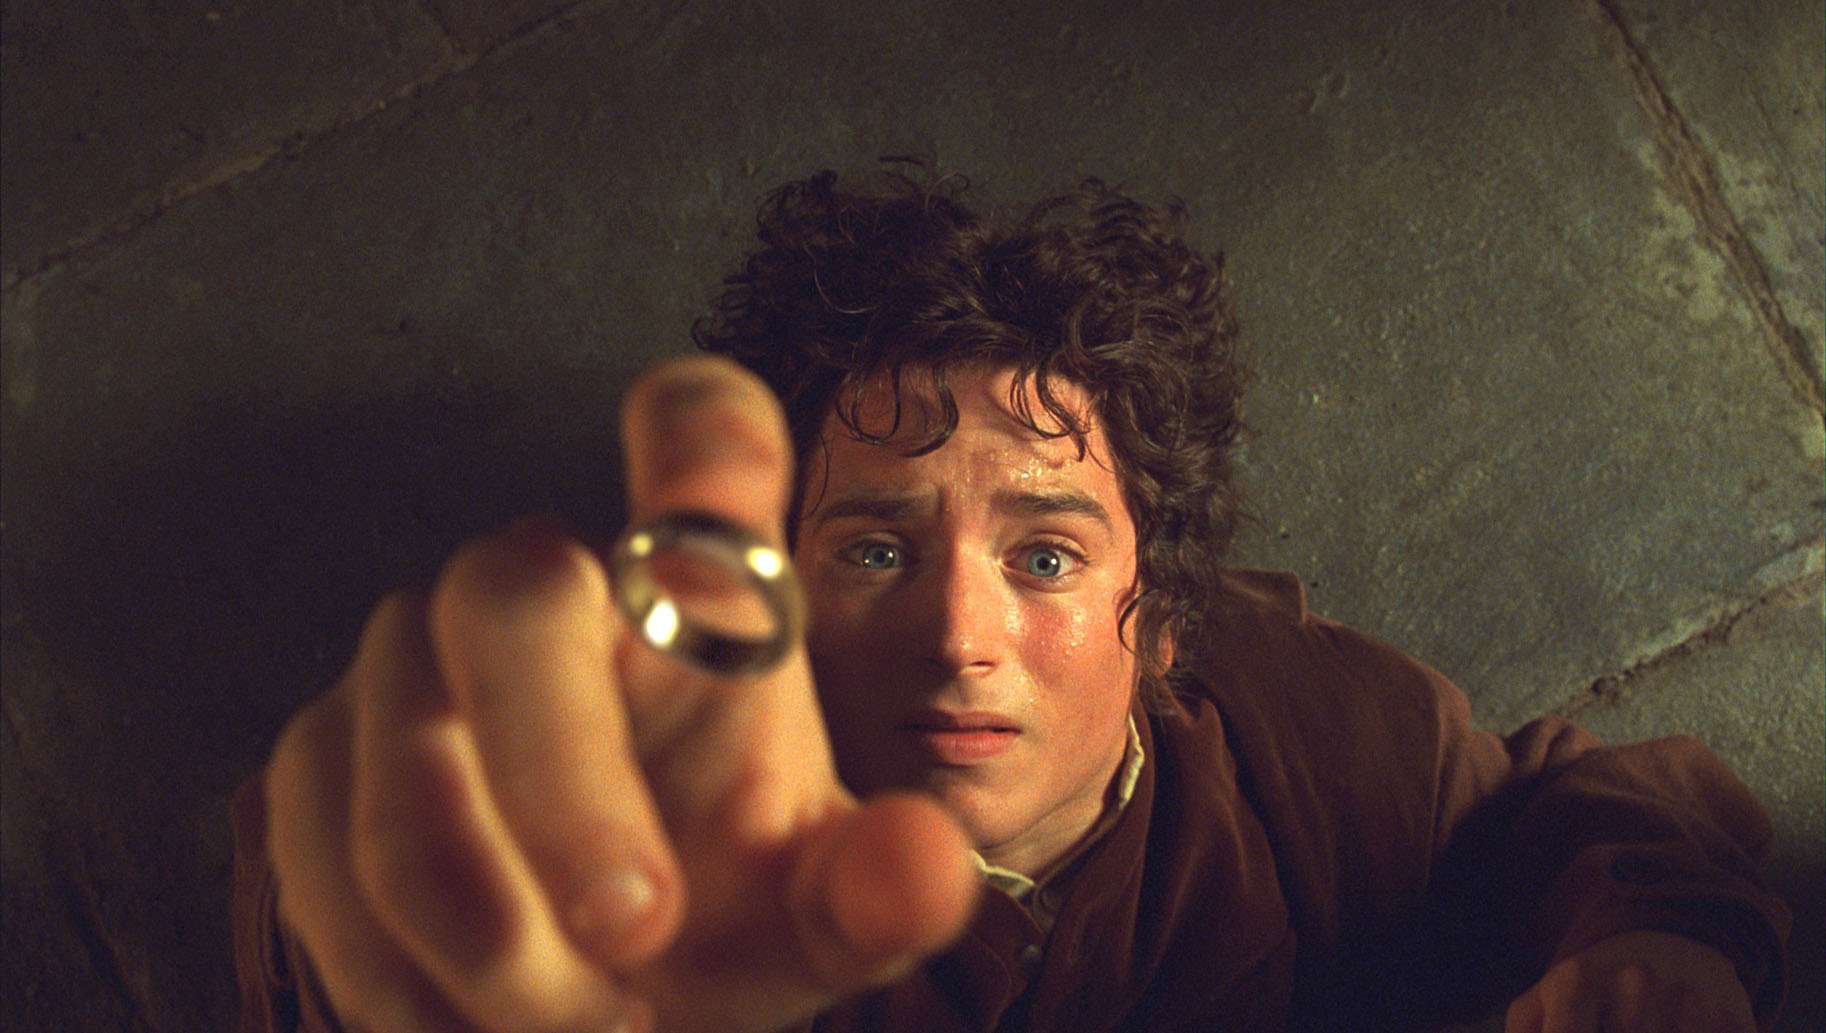 Lord Of The Rings' Cast: Where Are They Now? From Orlando Bloom To Viggo  Mortensen (PICS)